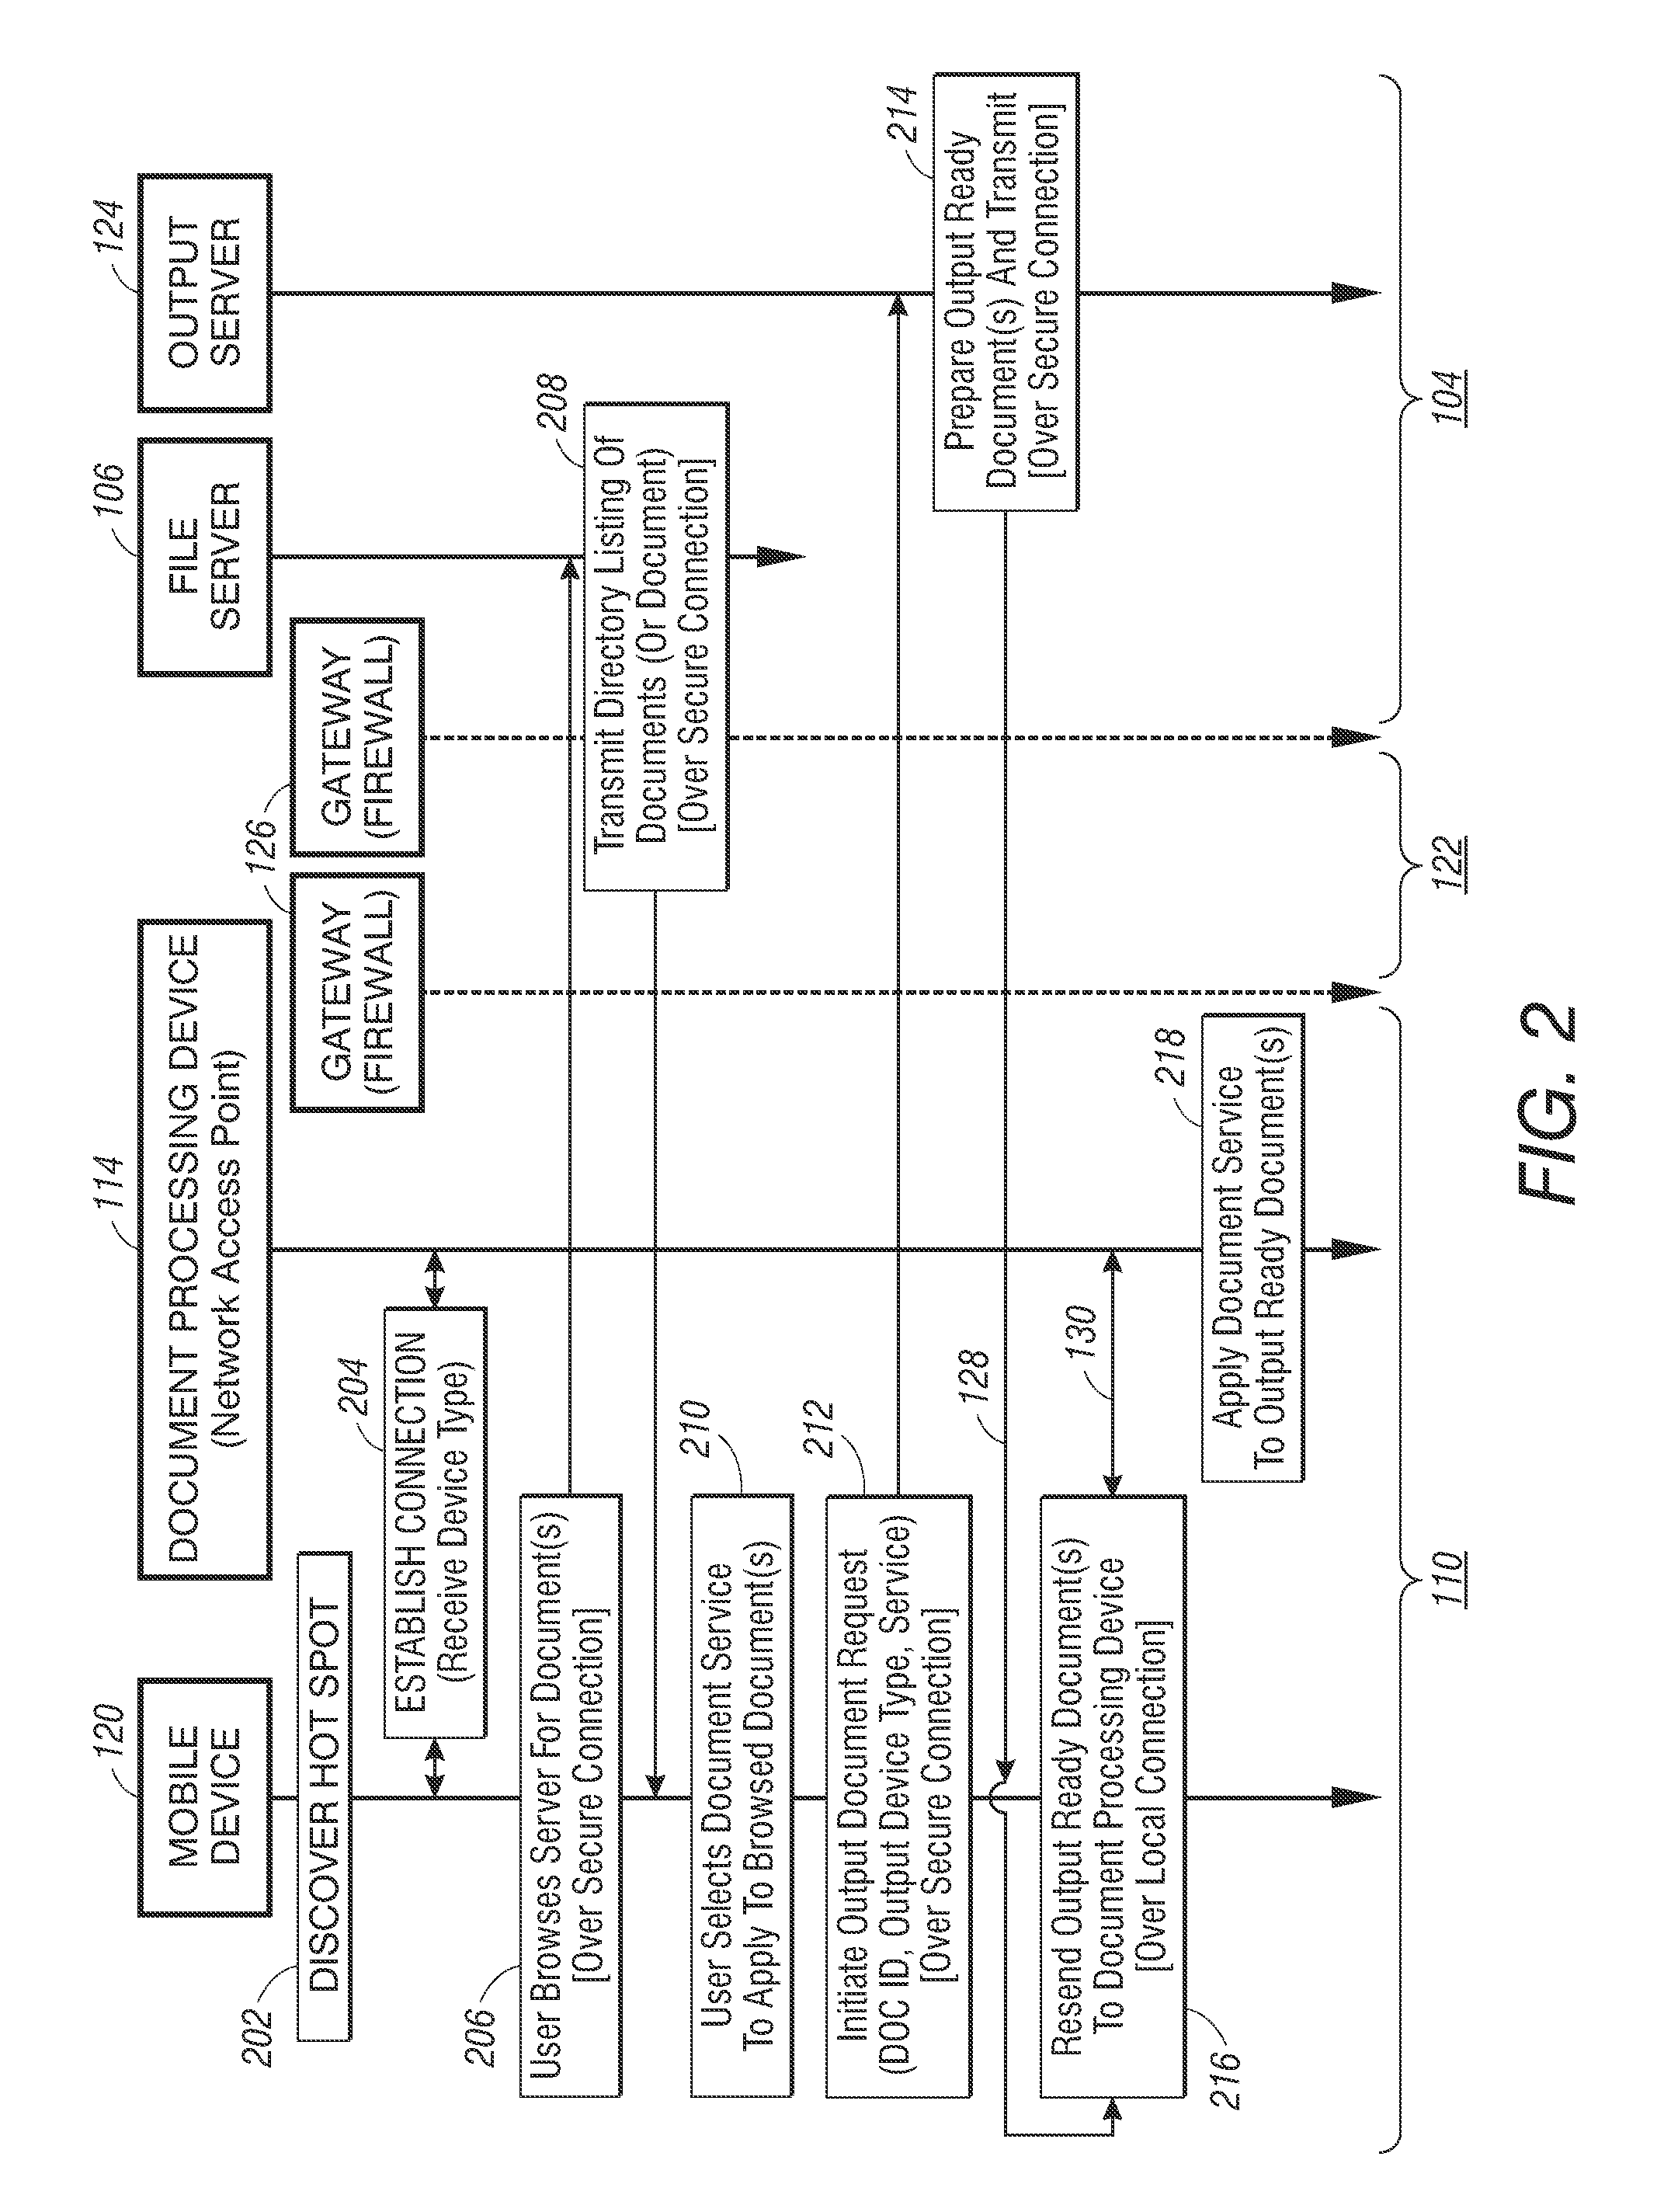 Method and apparatus for controlling document service requests from a mobile device